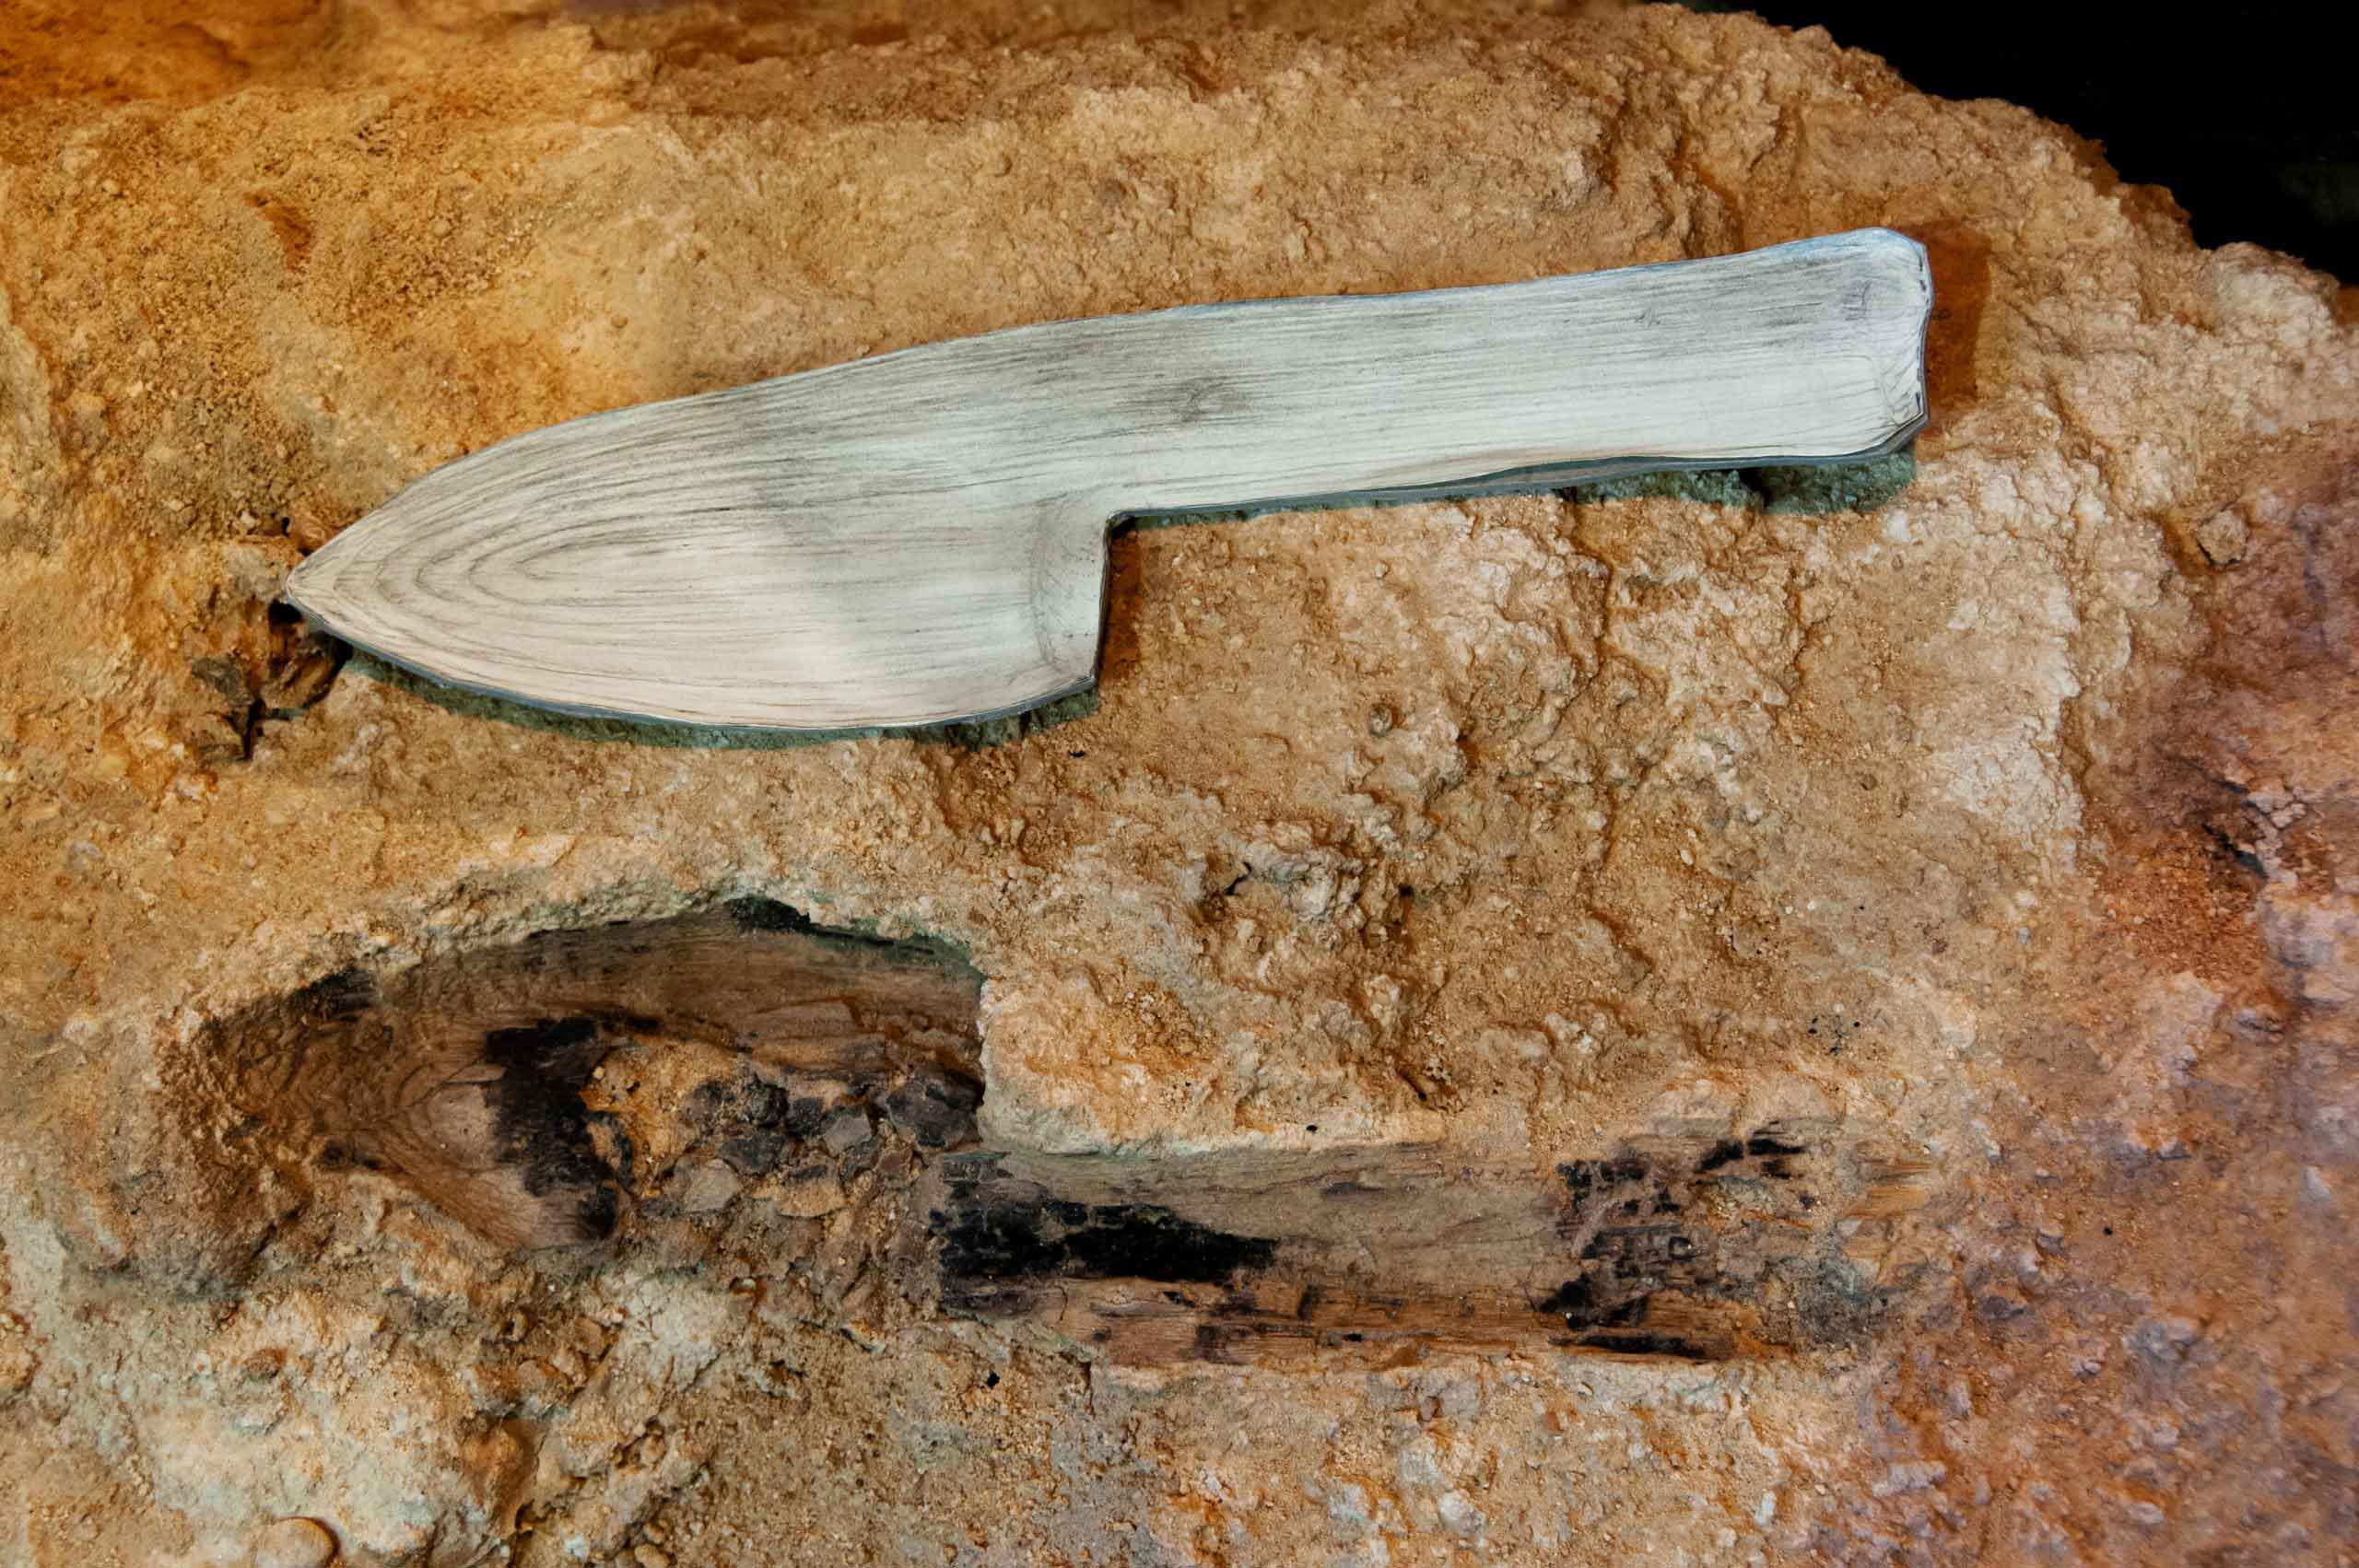 An imprint within an archaeological deposit in the shape of a knife or spade, with a wooden object of the same shape pictured above it